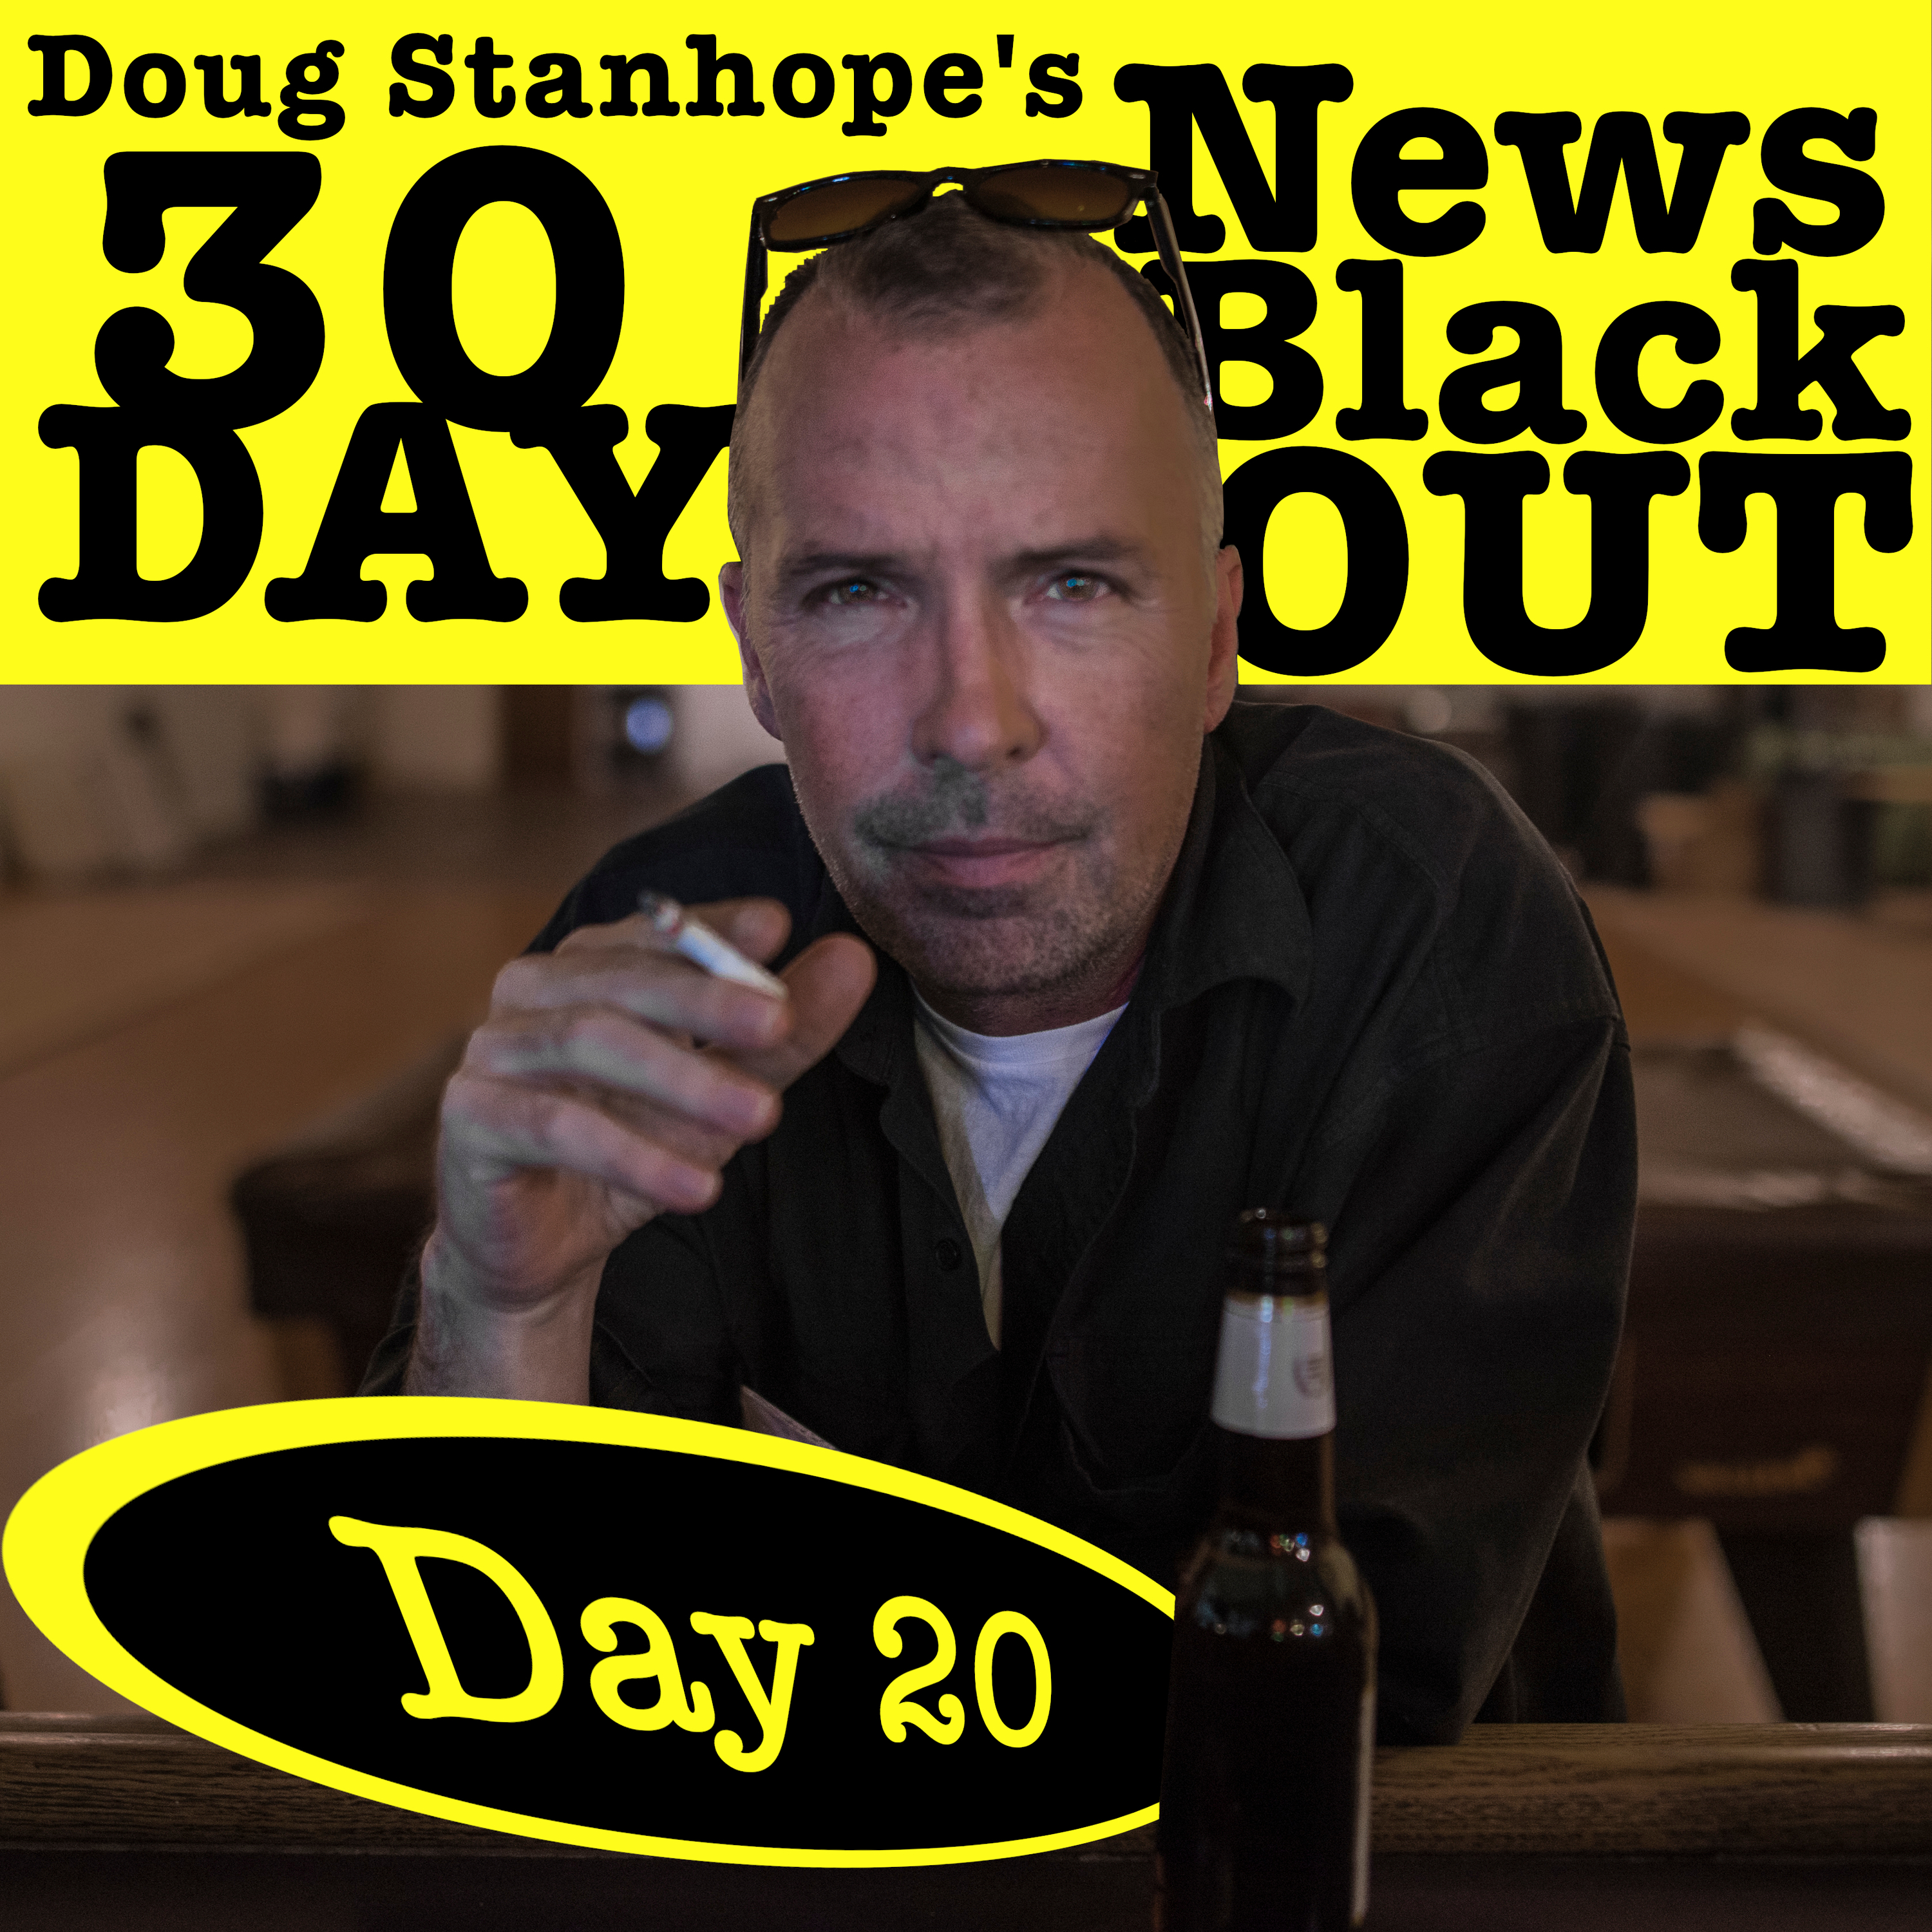 Ep. #384: Mike Kroeger from Nickelback - Doug Stanhope’s 30 Day News Blackout (Day 20)